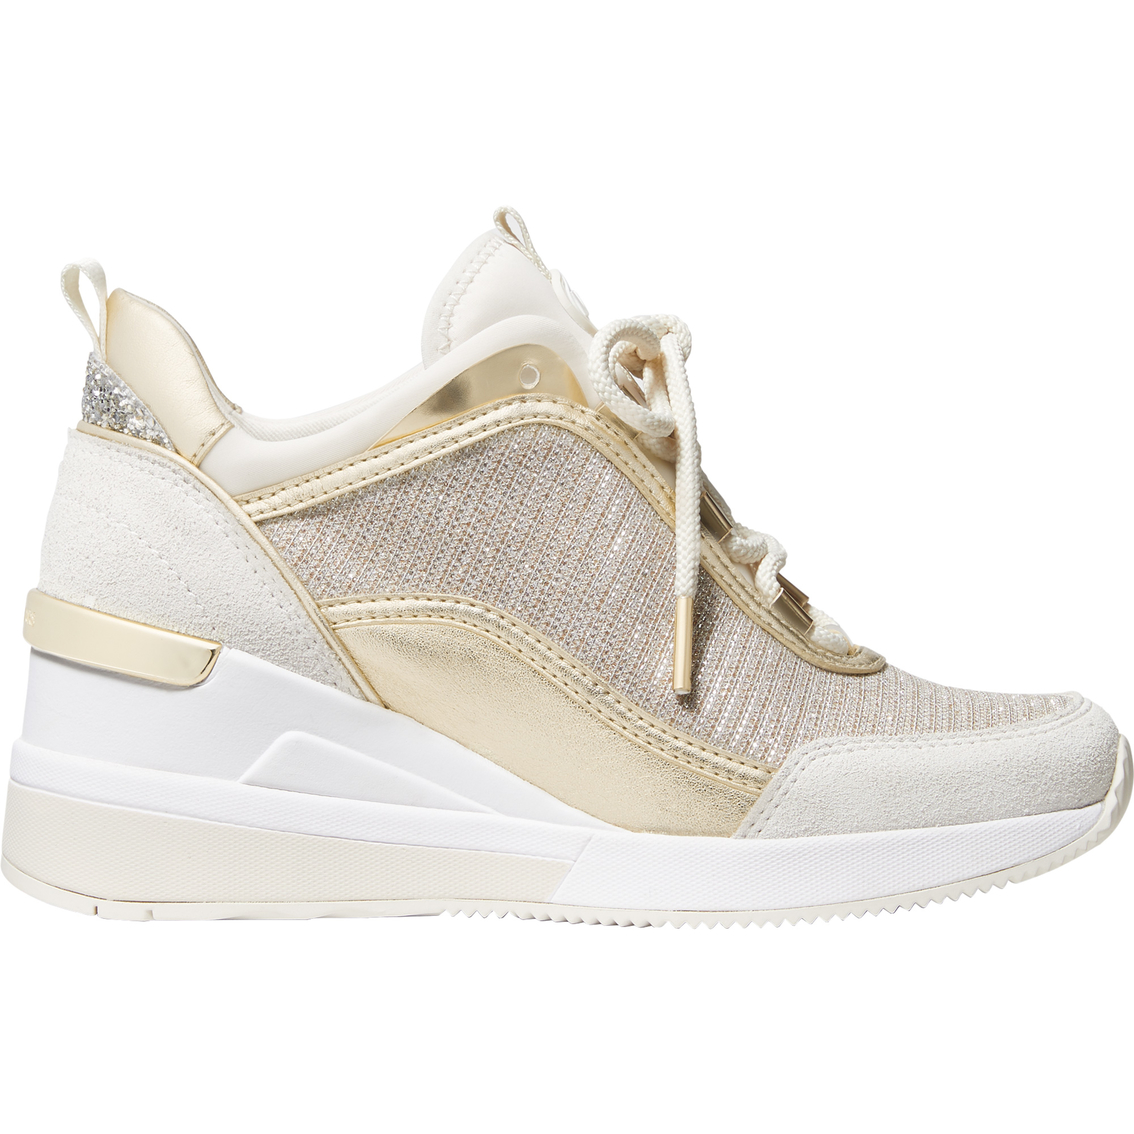 Michael Kors Lolly Trainer Shoes | Sneakers | Shoes | Shop The Exchange